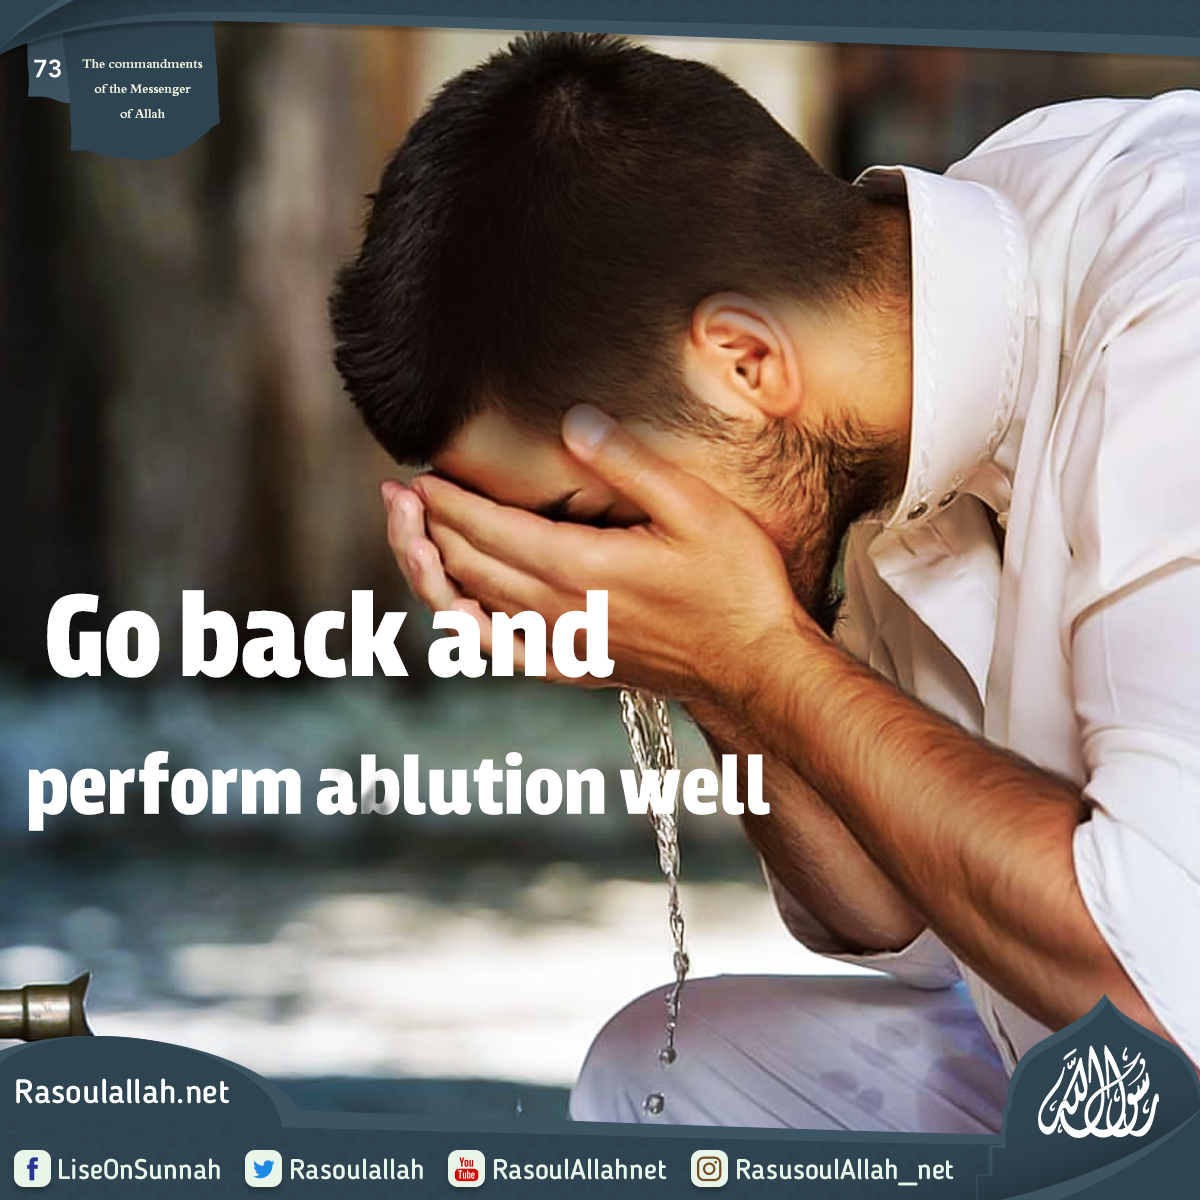 Go back and perform ablution well